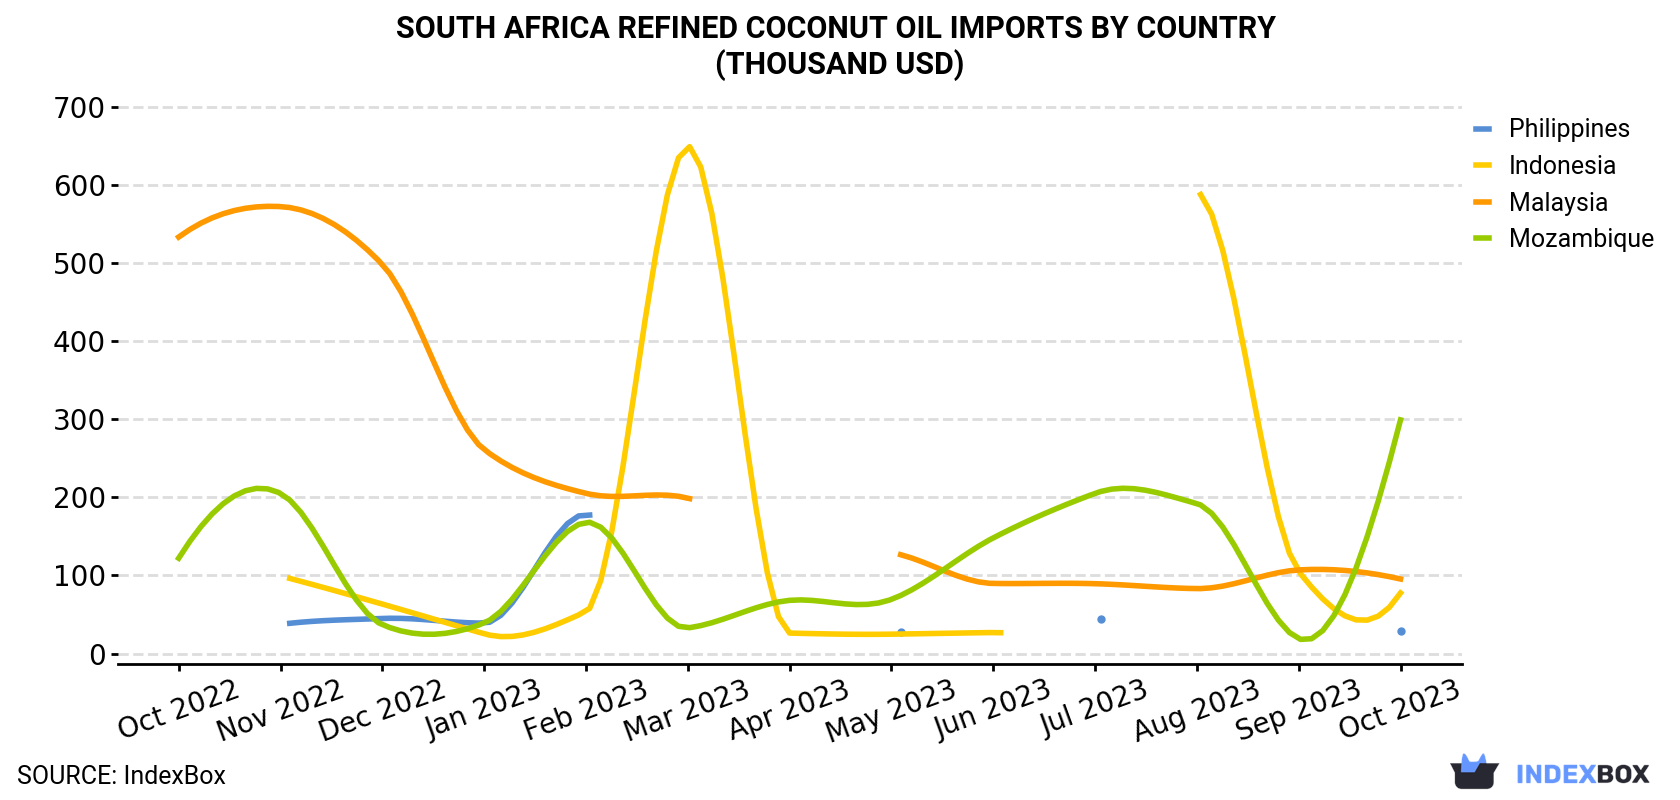 South Africa Refined Coconut Oil Imports By Country (Thousand USD)